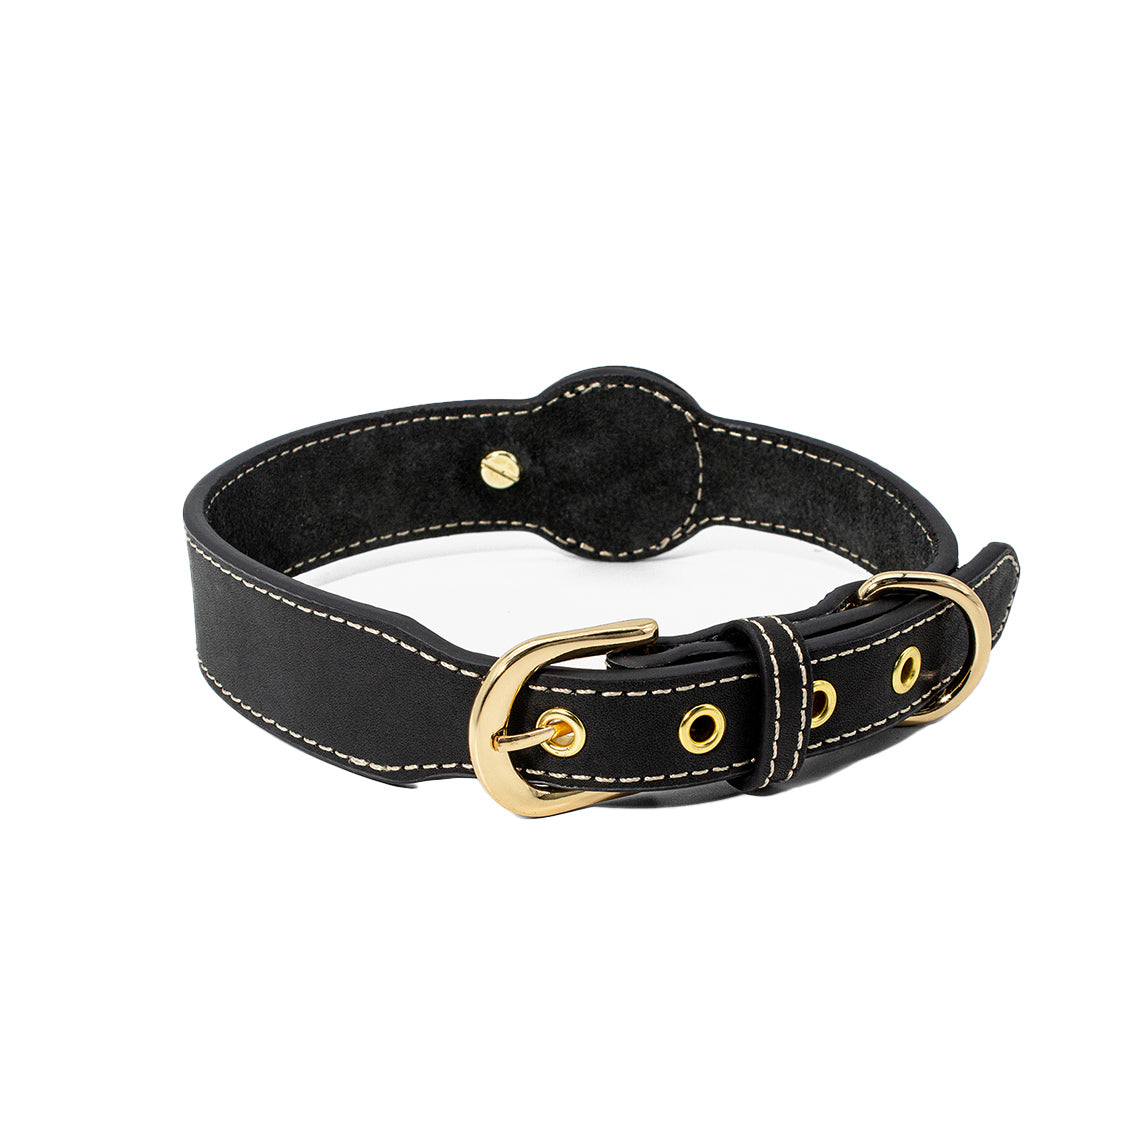 Genuine Leather Dog Collar with Airtag Case - Black